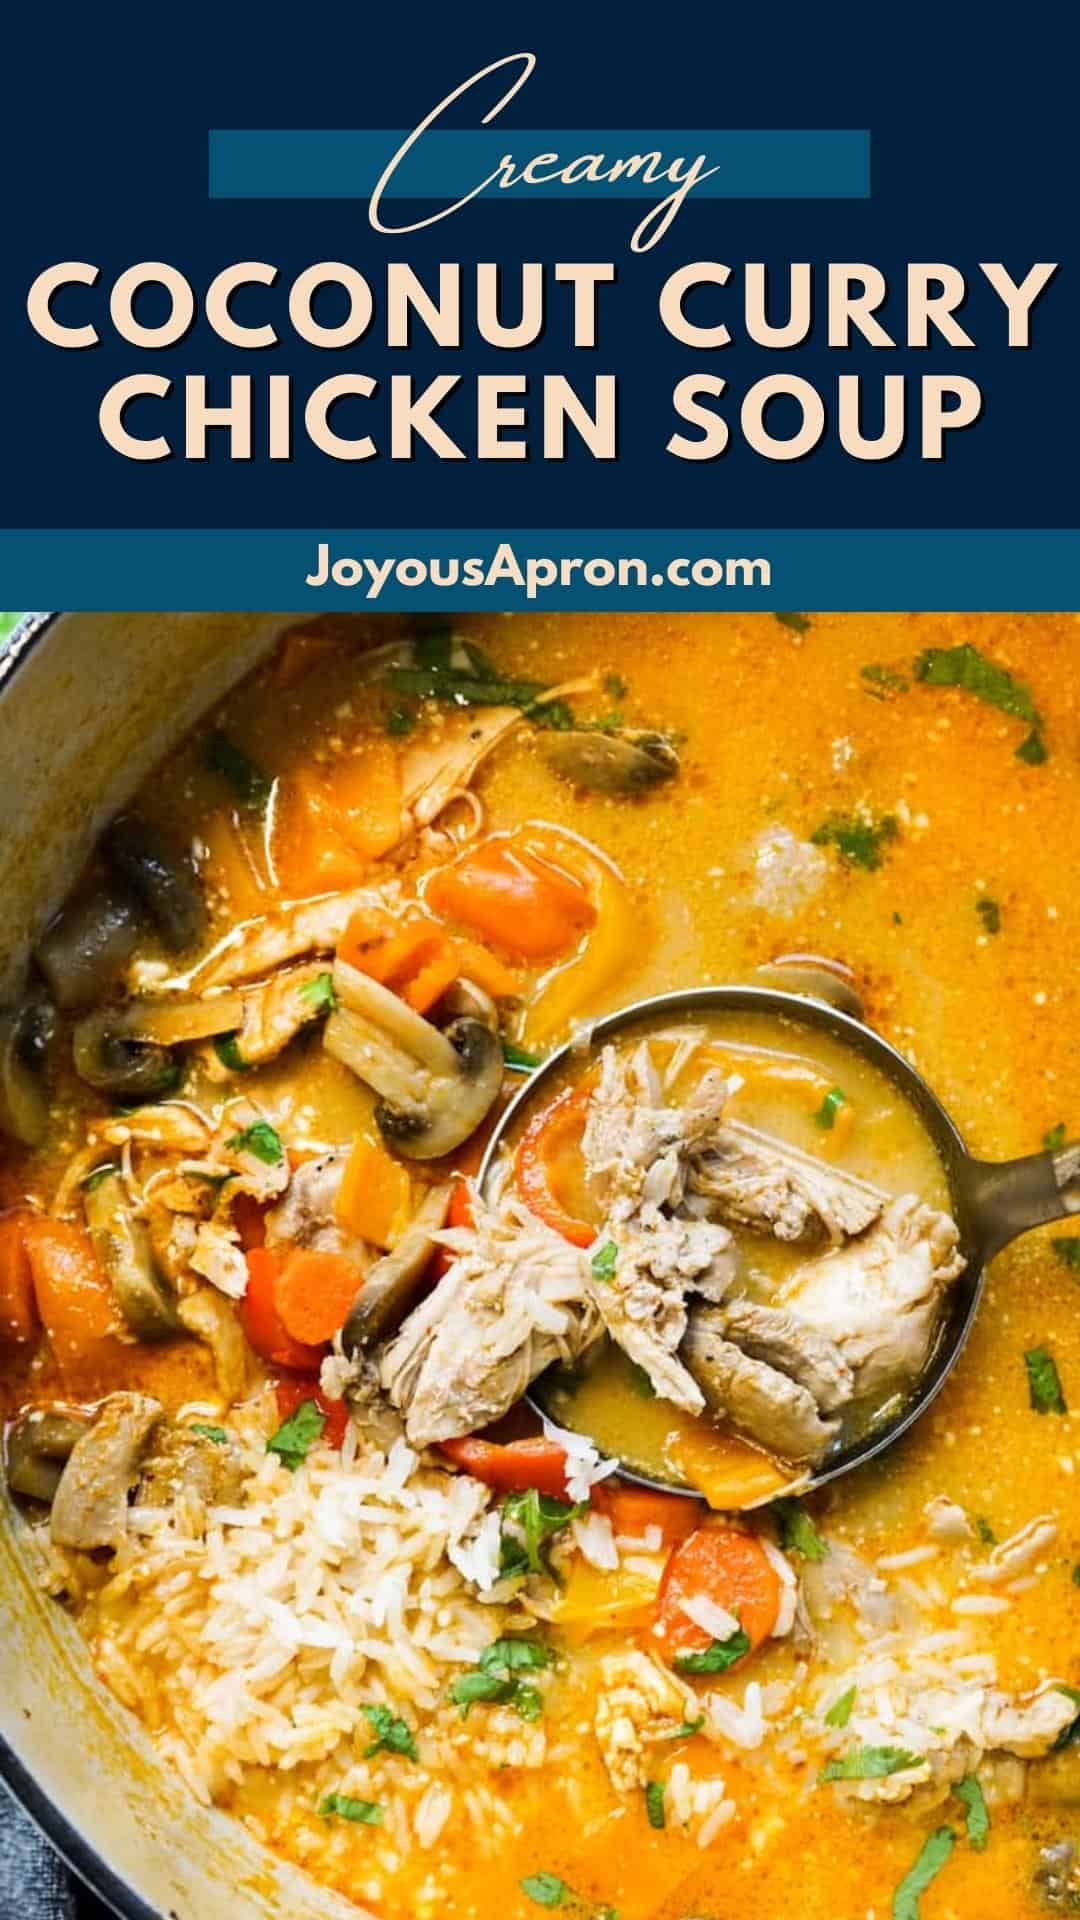 Creamy Coconut Curry Chicken Soup - A easy and delicious Thai red curry soup loaded with chicken, rice, mushrooms, and vegetables. Hearty, creamy and filled with bold flavors. via @joyousapron